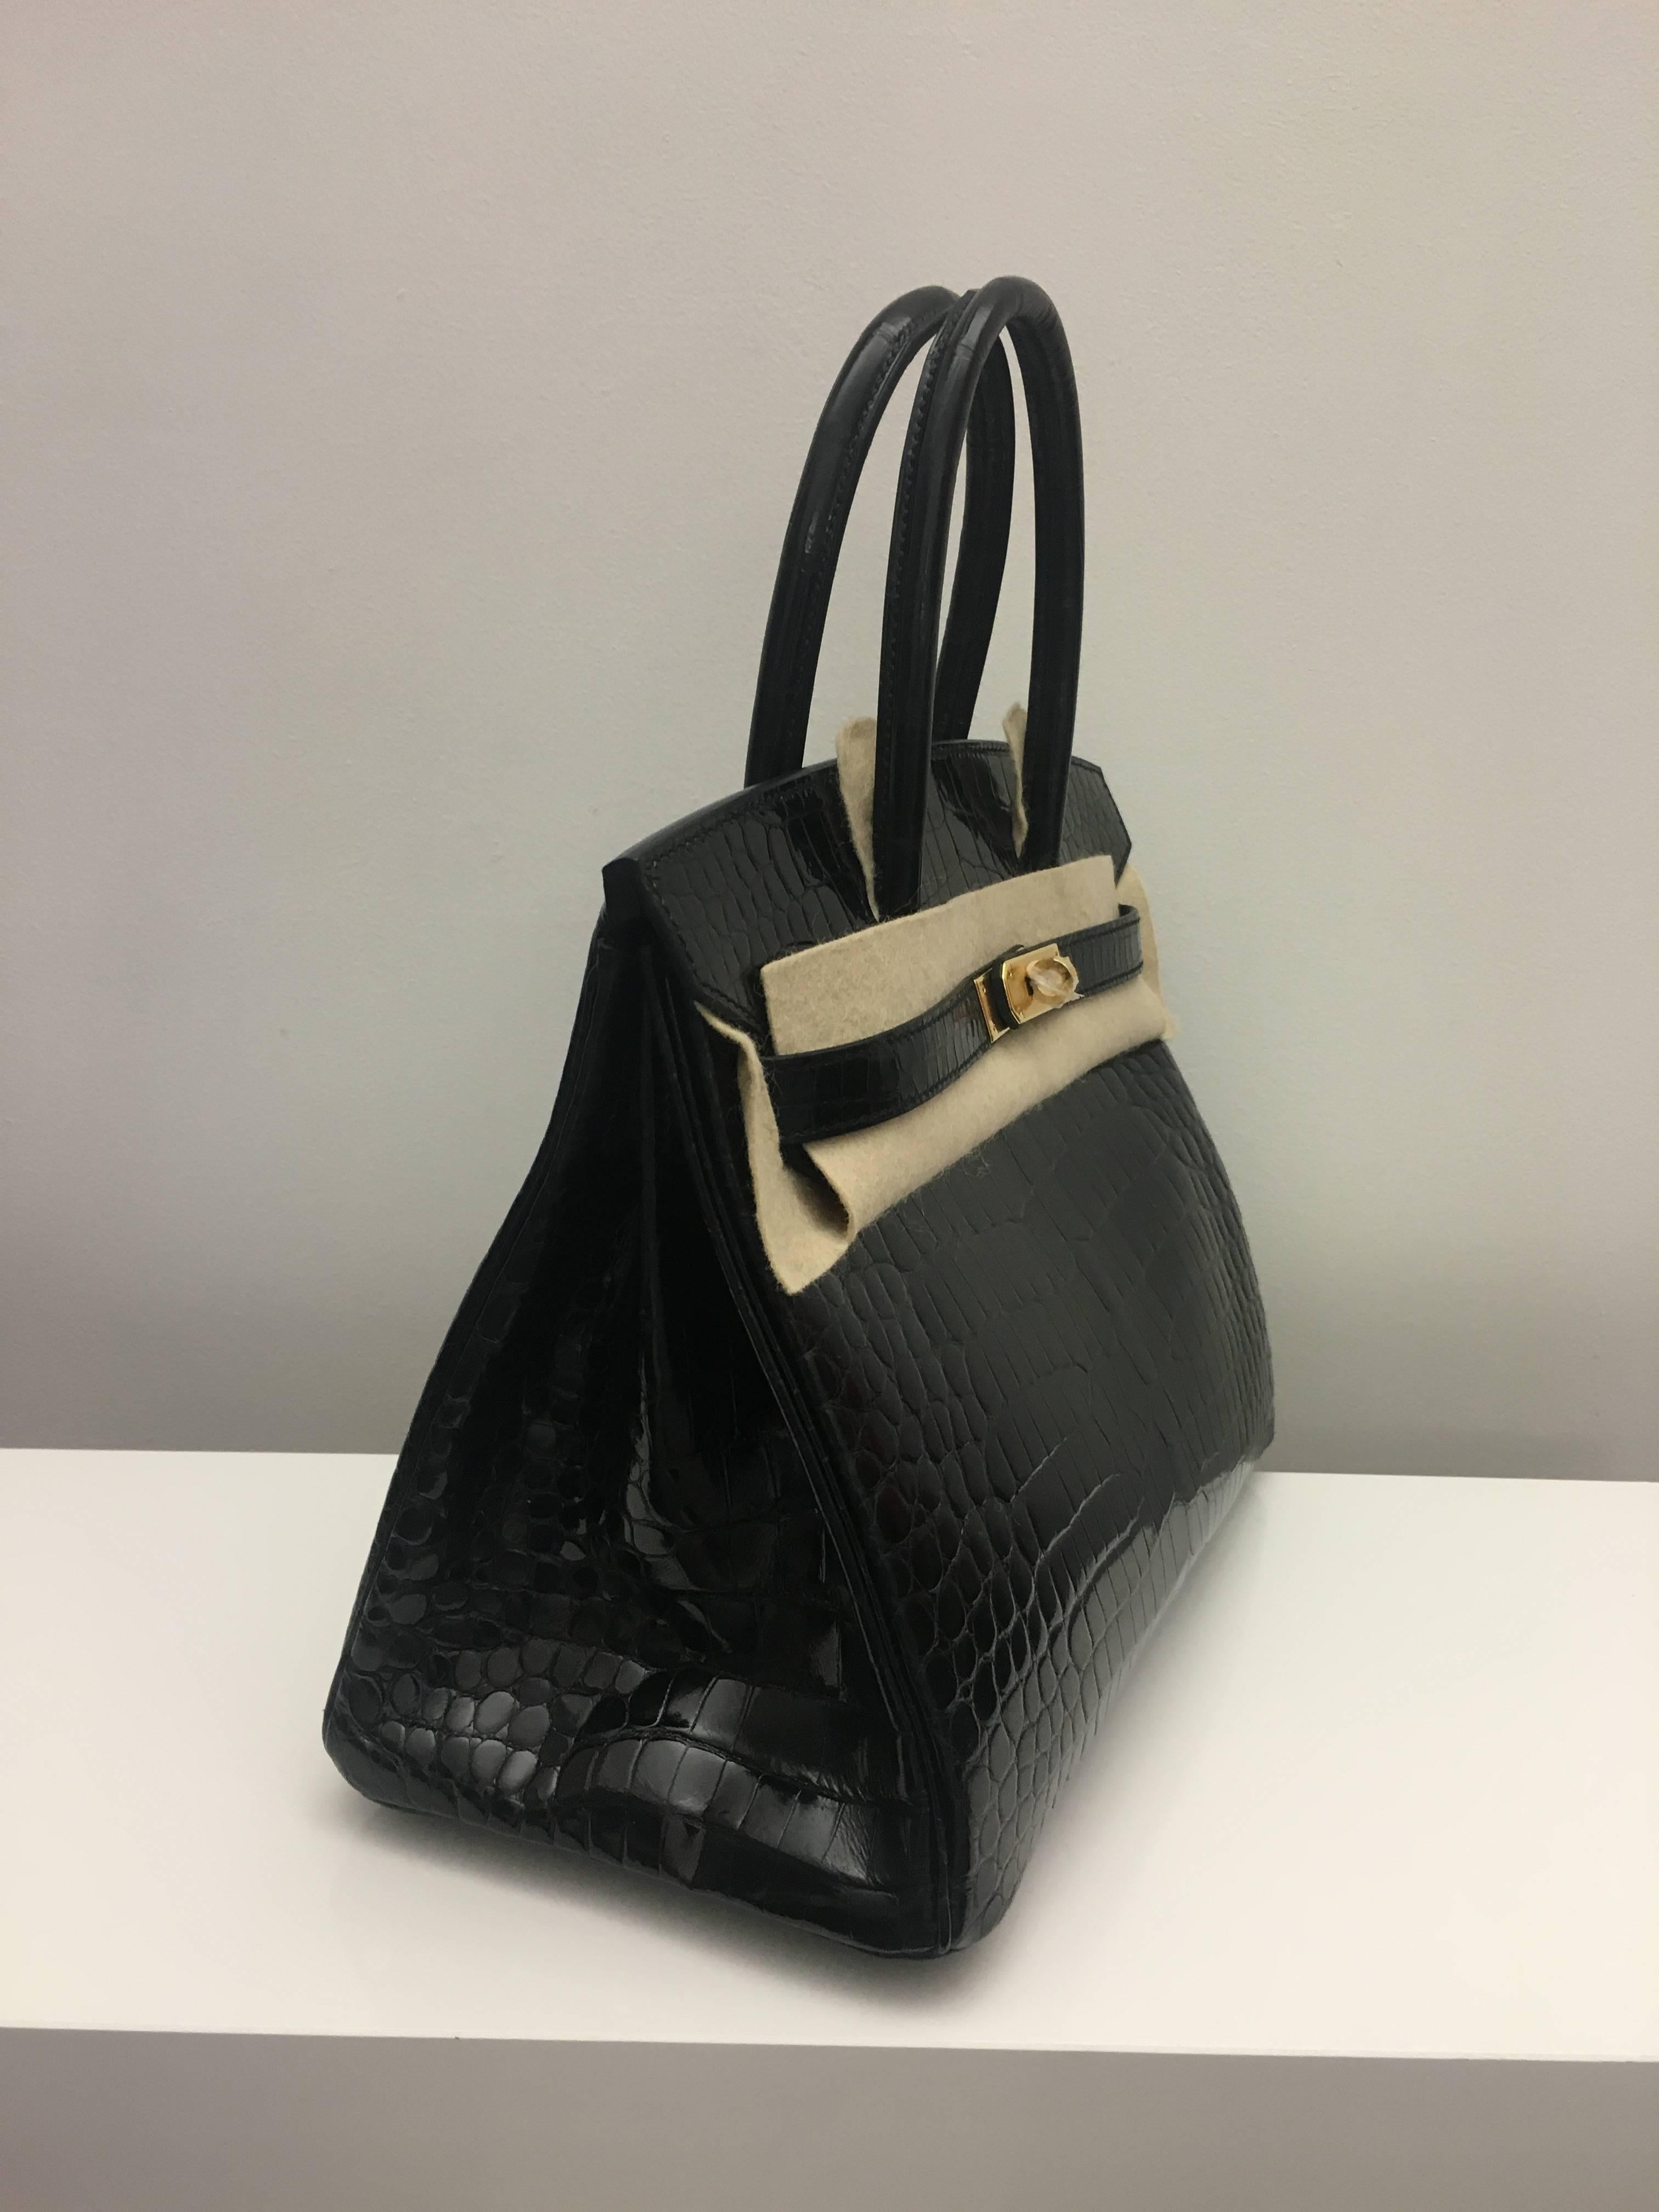 Hermes 
Birkin Size 30
Shiny Croc 
Colour Black (Noir)
Gold Hardware 
store fresh, comes with receipt and full set (dust bag, box...) 
Hydeparkfashion specializes in sourcing and delivering authentic luxury handbags, mainly Hermes, to client